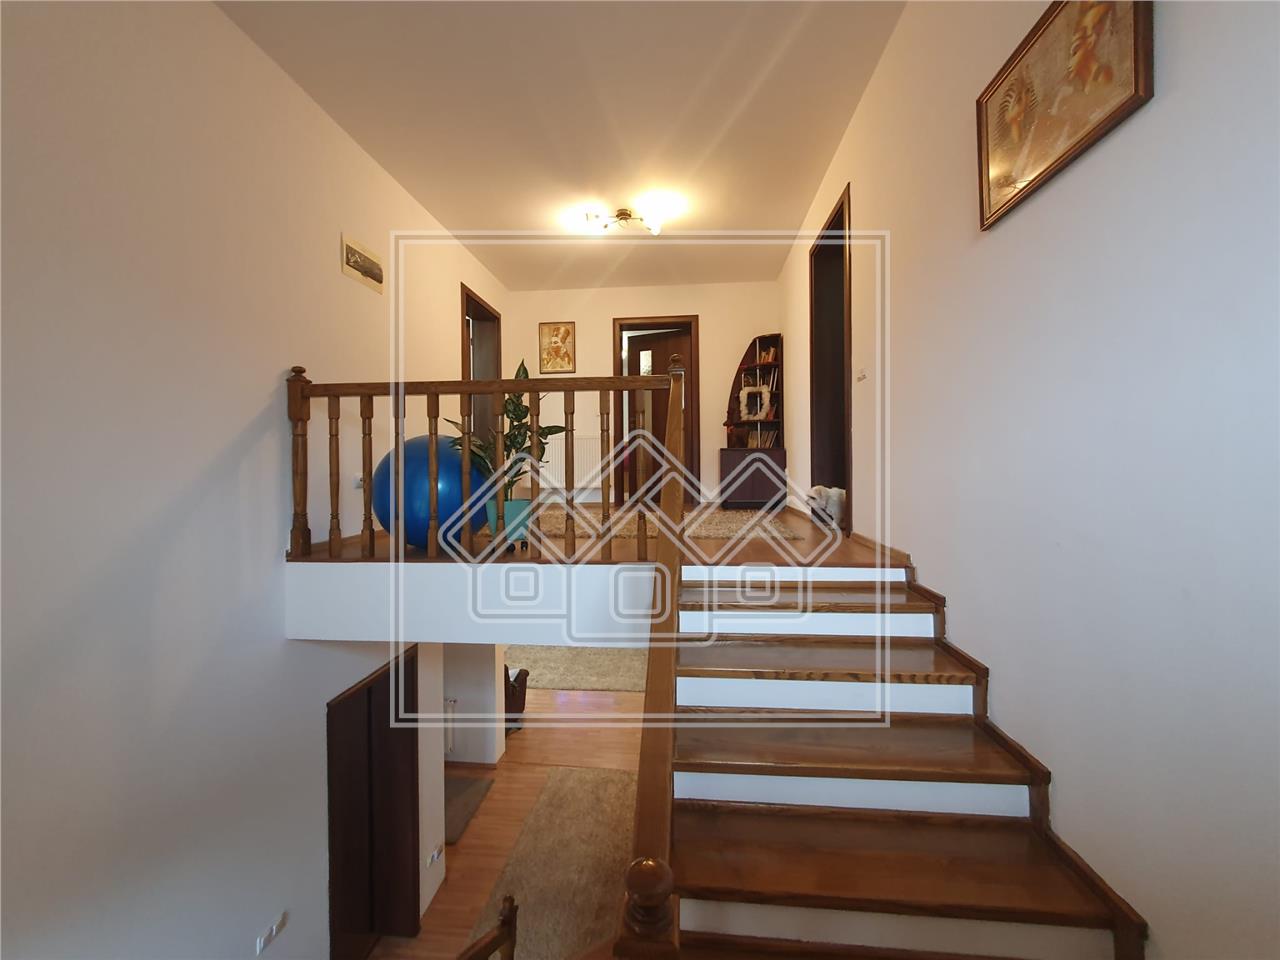 House for sale in Sibiu - 250, 6 rooms, garage - Sura Mare